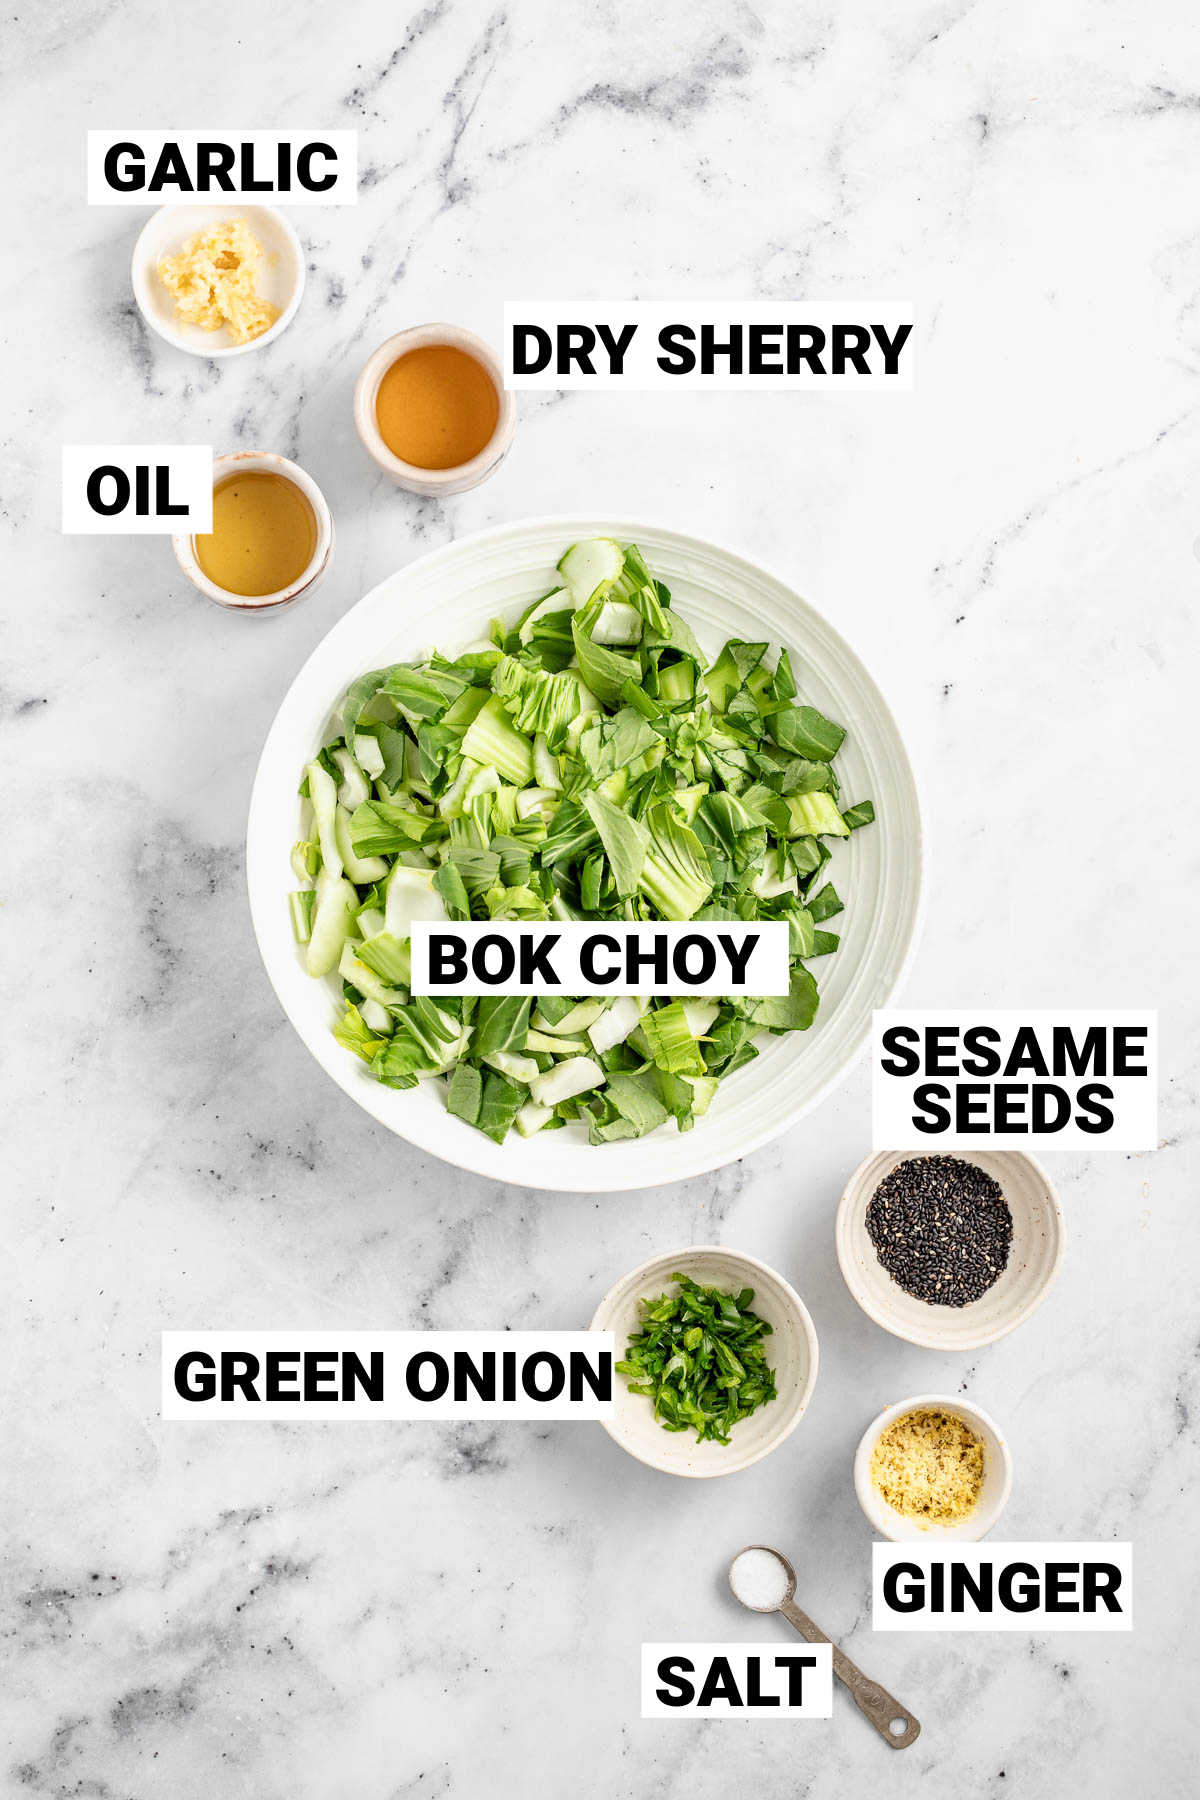 ingredients to make simple bok choy, including dry sherry, green onion, ginger, garlic, oil, and sesame seeds